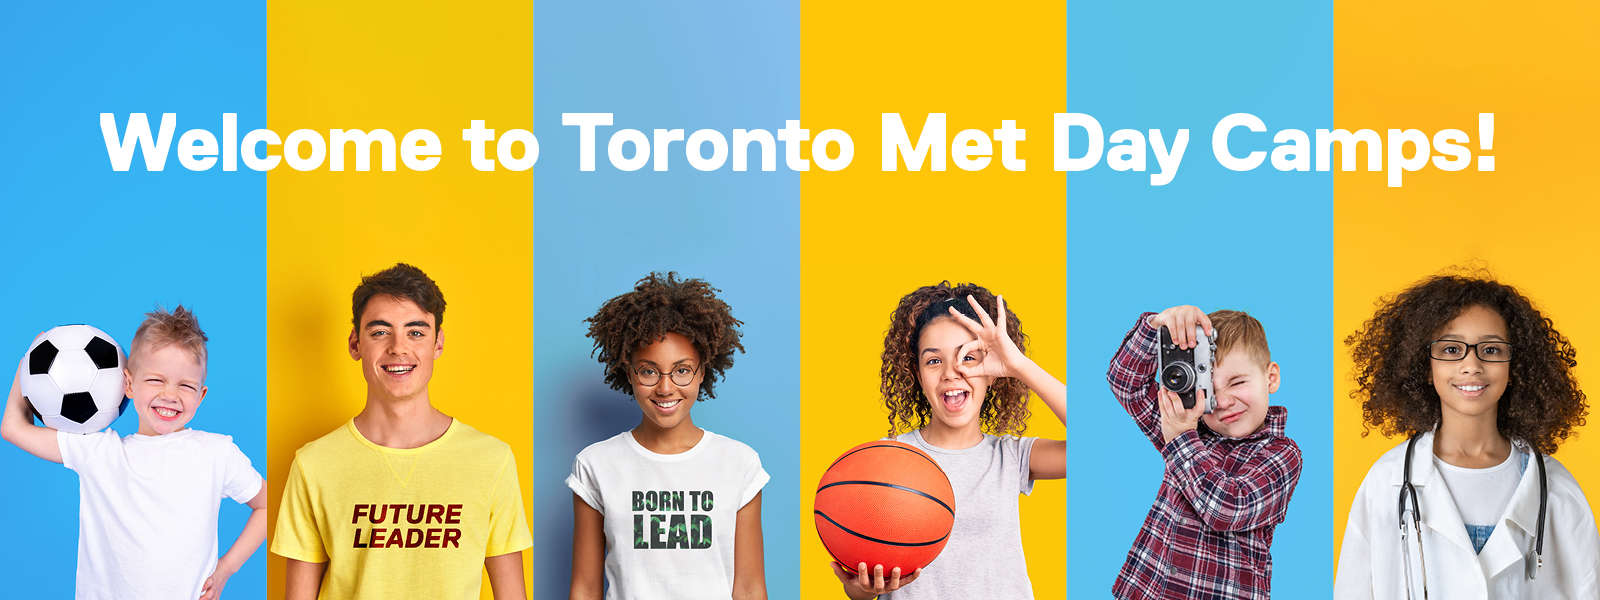 Six young people smile, posing with a variety of equipment and attire, including a basketball, a lab coat, and a camera. Text says "Welcome to Toronto Met Day Camps!"